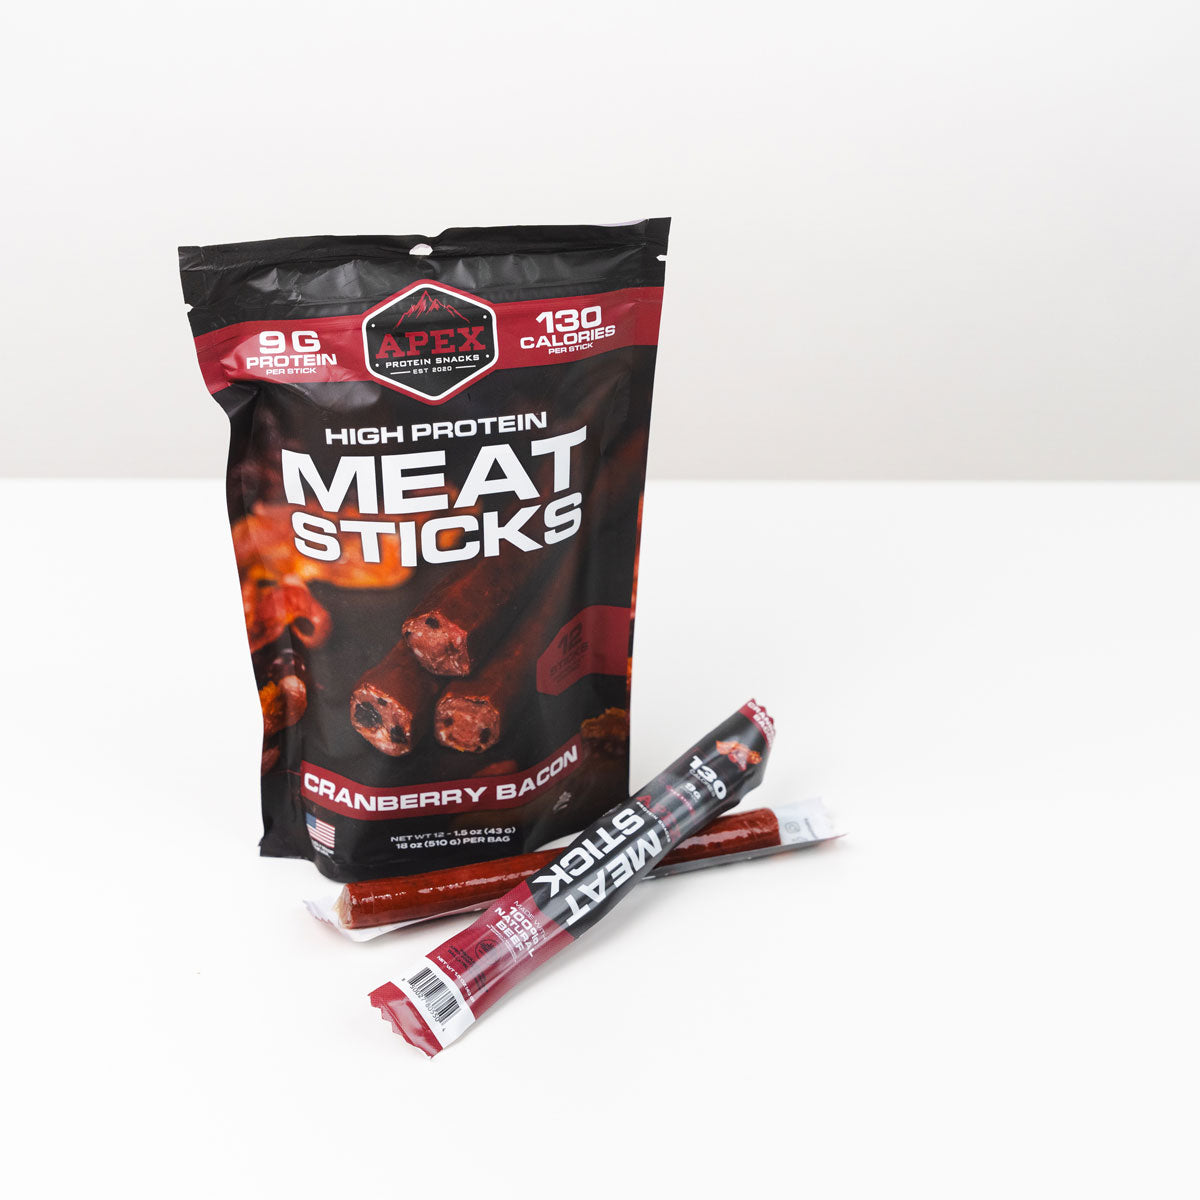 Cranberry Bacon Apex Protein Meat Sticks and Bag